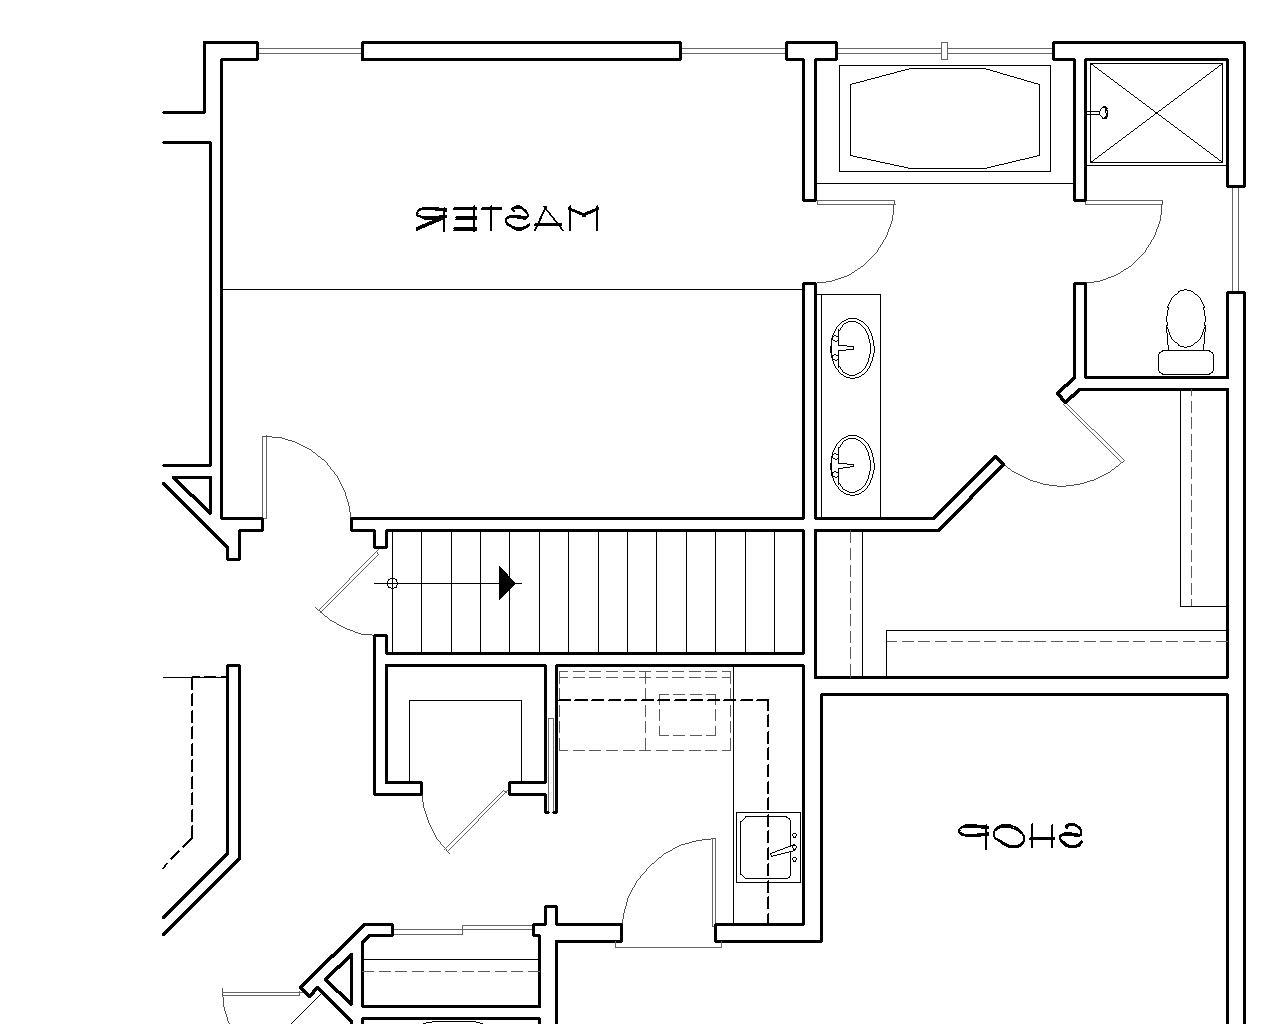 Basement Stair Location image of Harlow House Plan